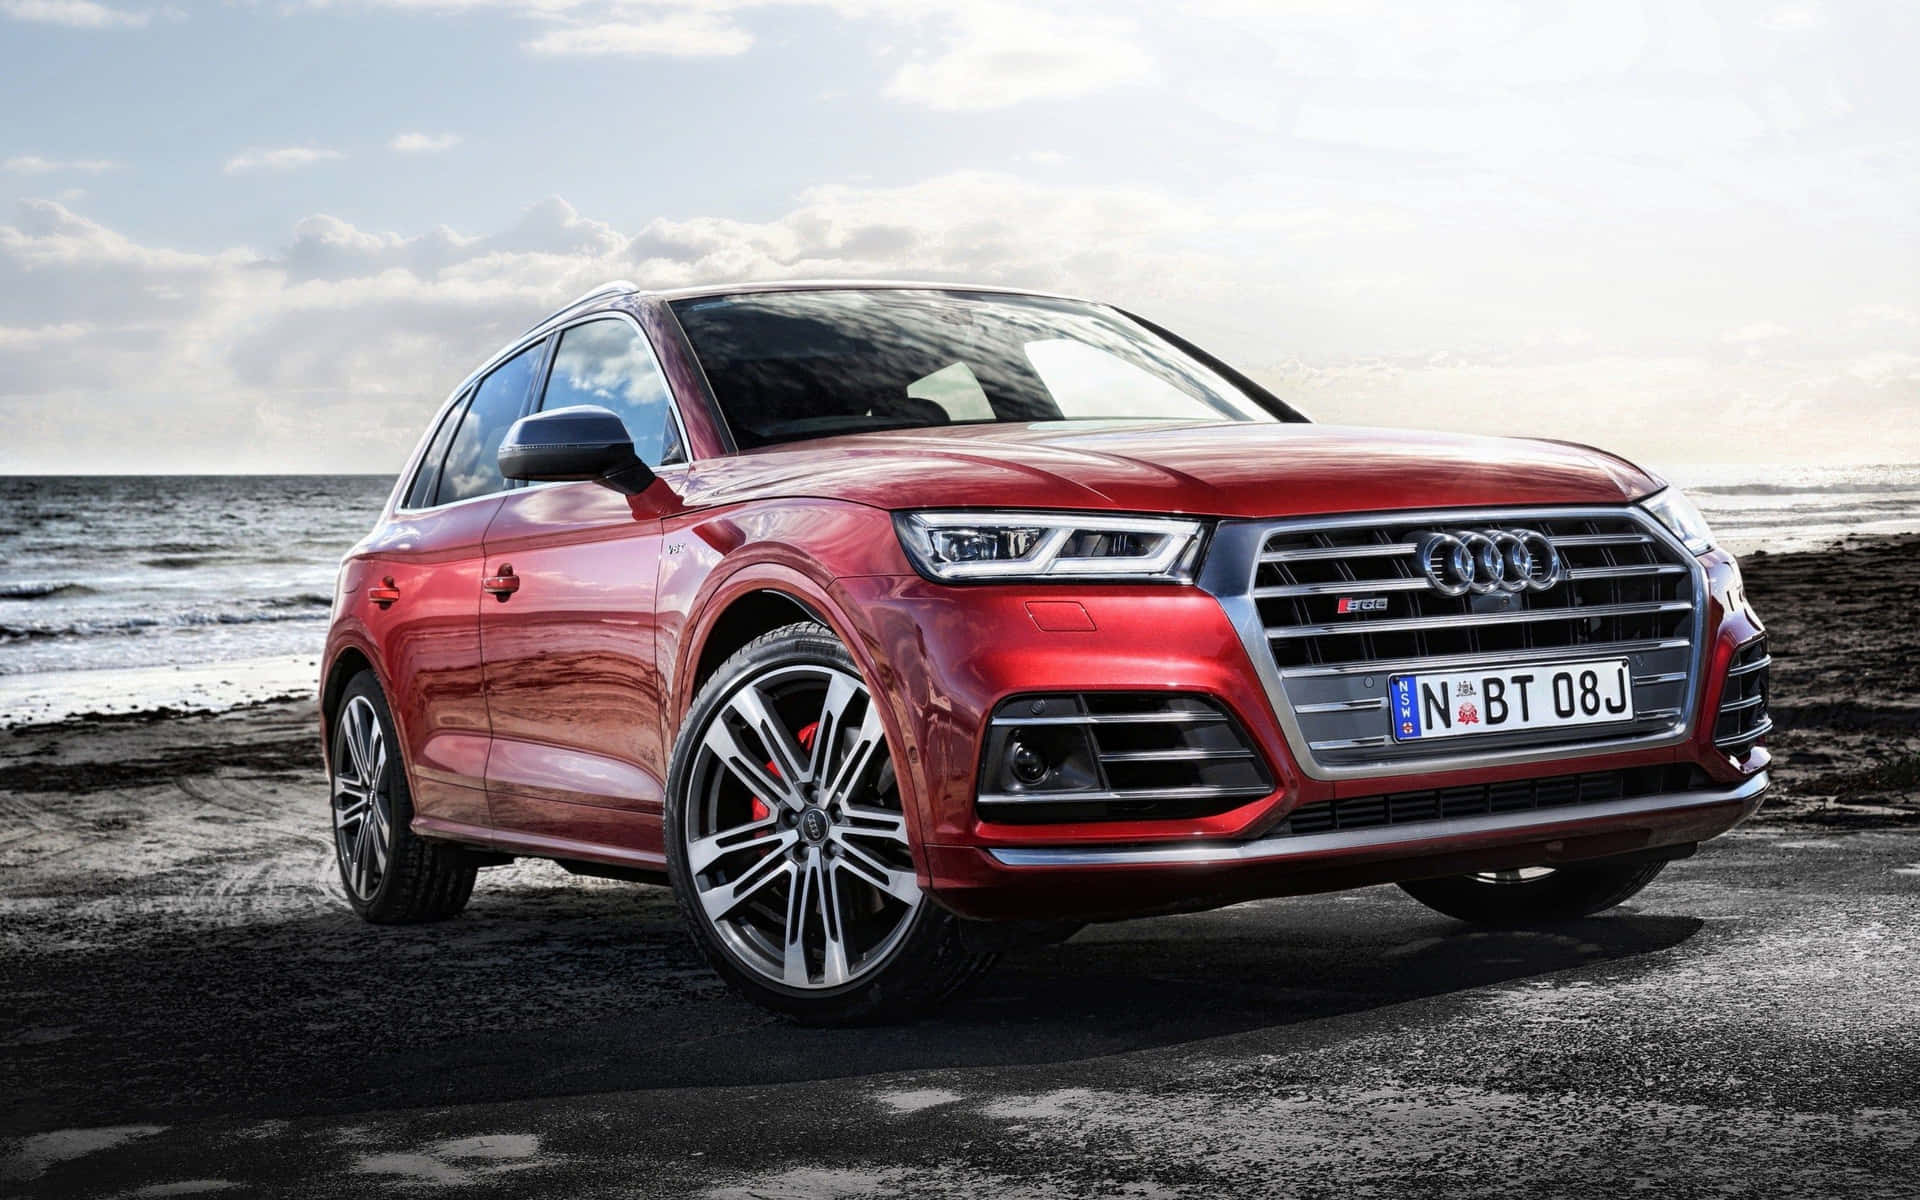 Captivating Audi SQ5 on an Open Road Wallpaper